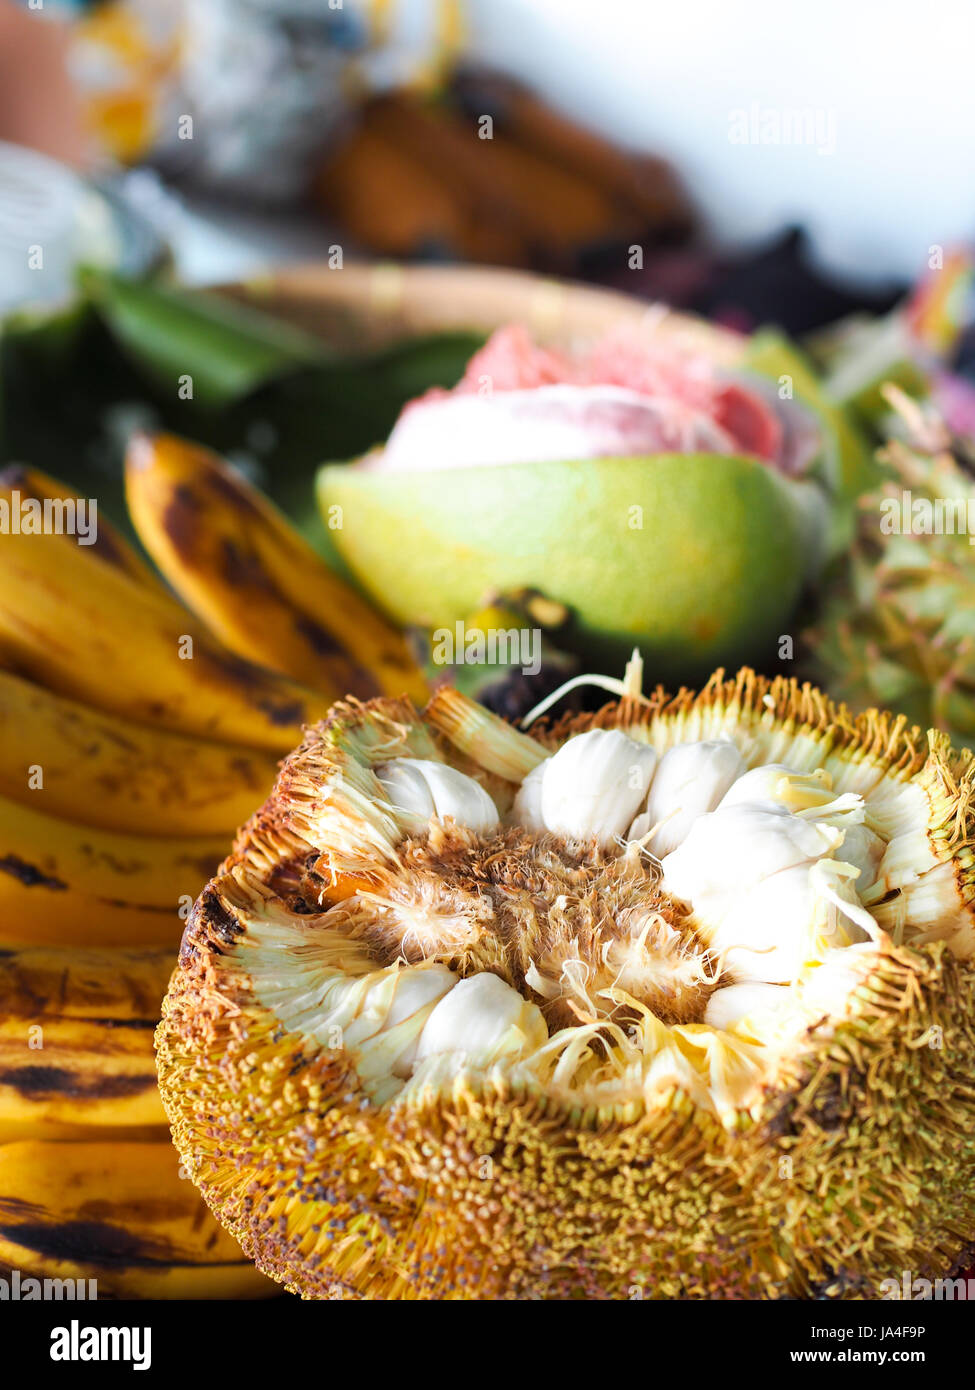 Marang,  a tropical fruit found in Davao, Philippines, that looks like a jackfruit and tastes like a cross between soursop and mangosteen. Stock Photo